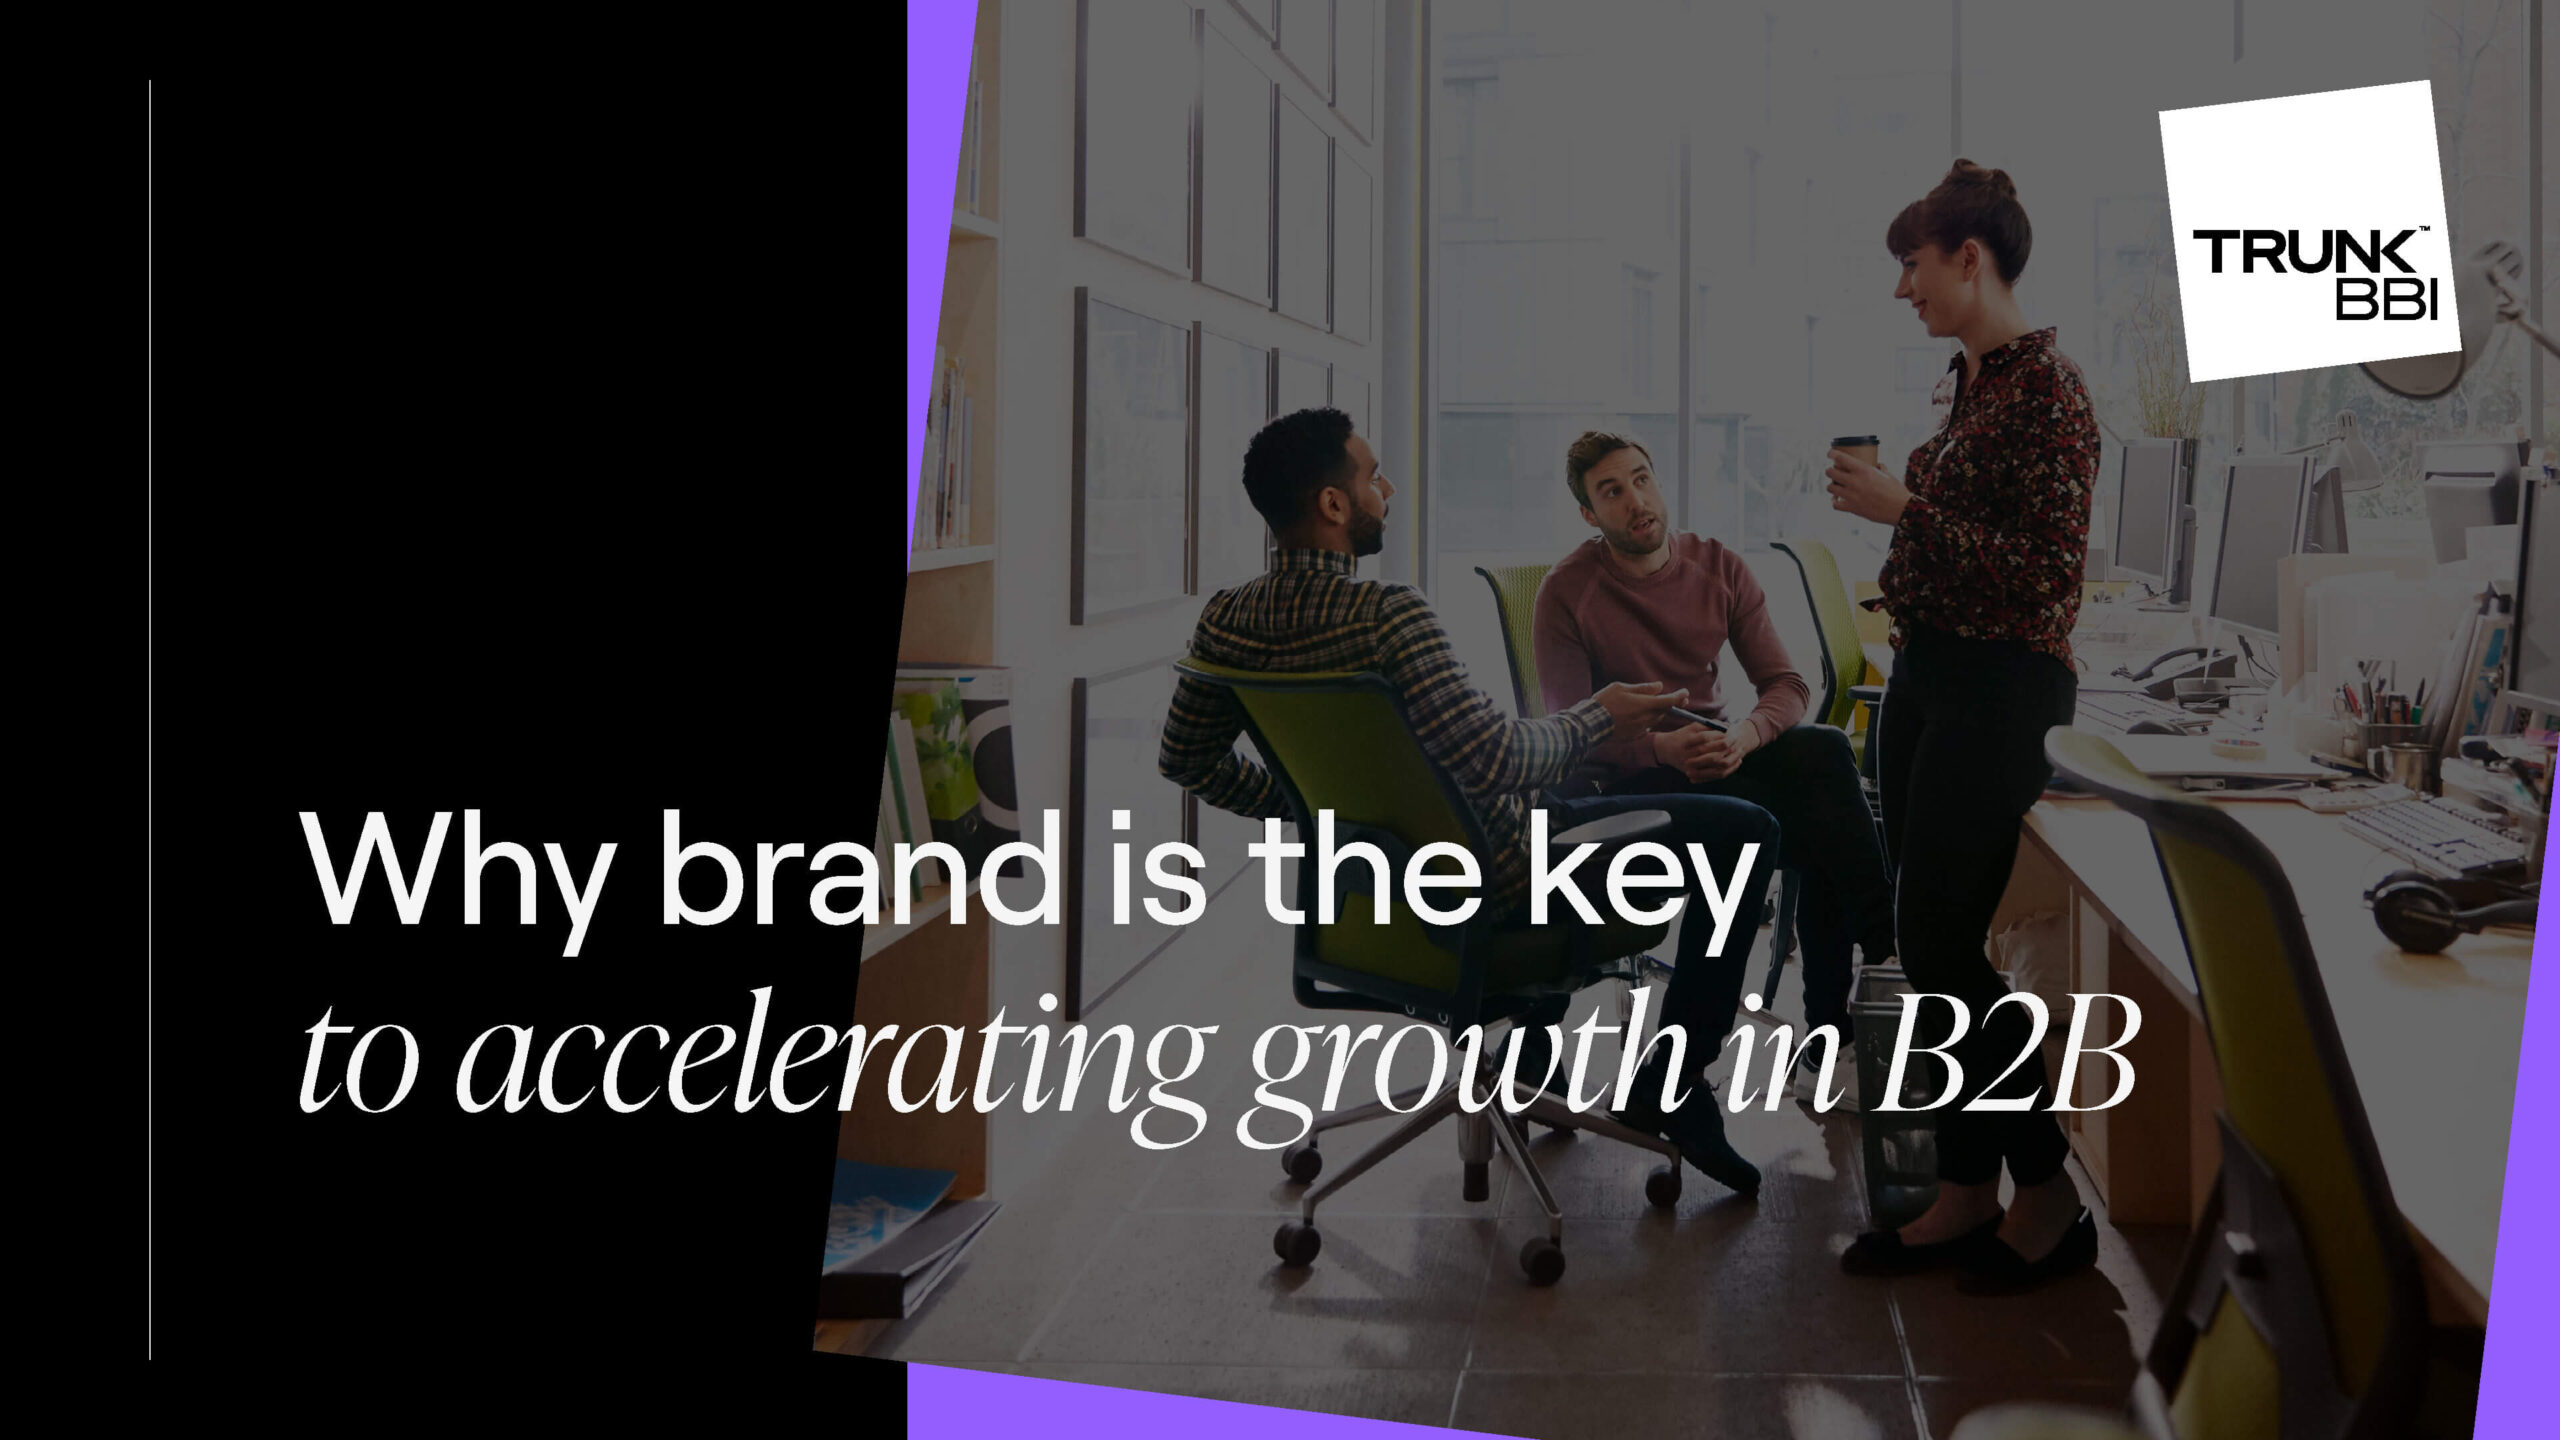 103491_TrunkBBI Why Brand is Key to Growth Report_Page_01